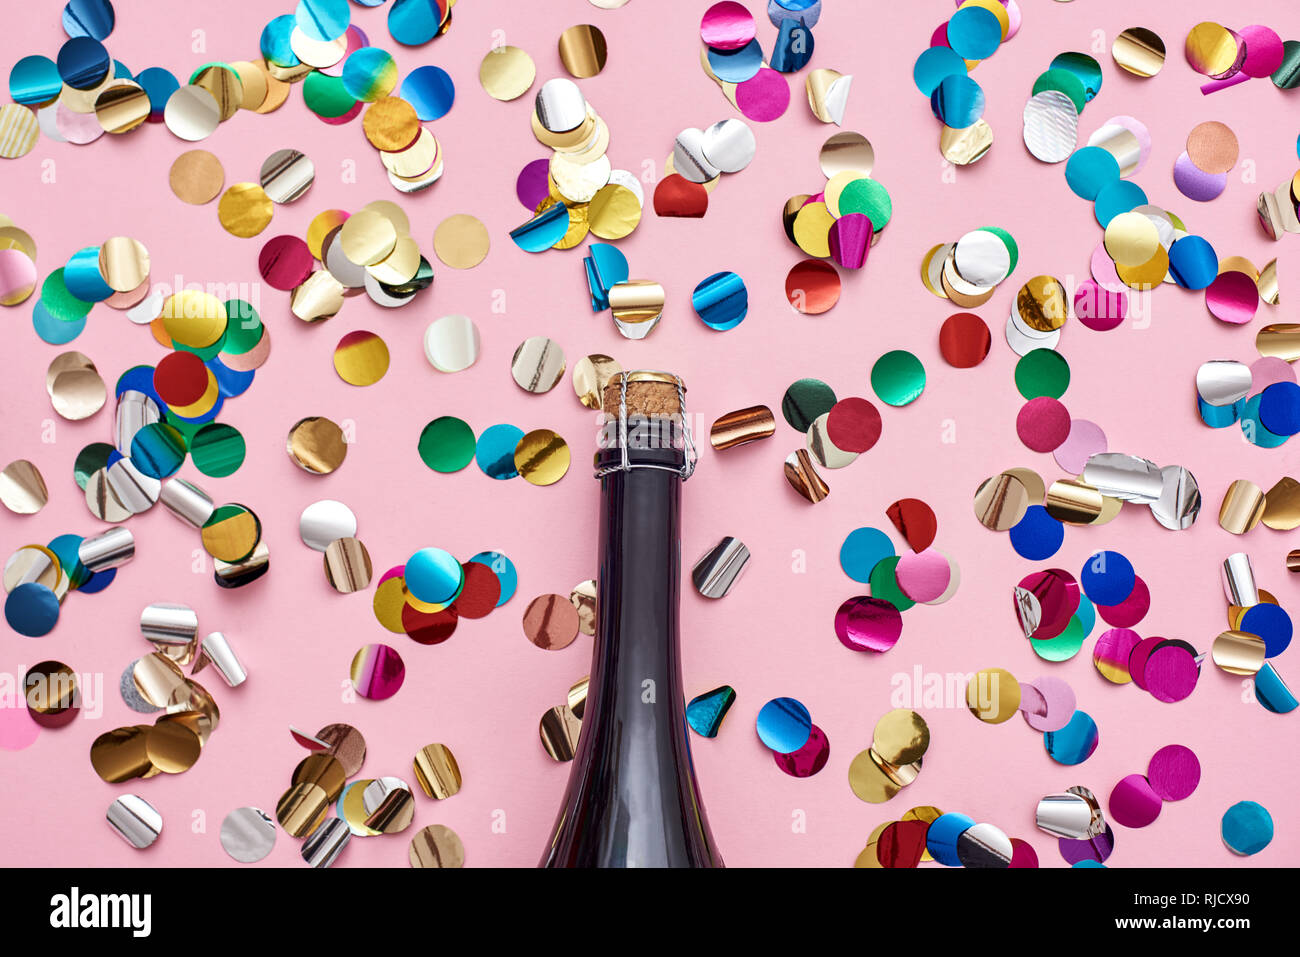 Party started A bottle of champagne on pink background with glittering confetti. Top view Stock Photo